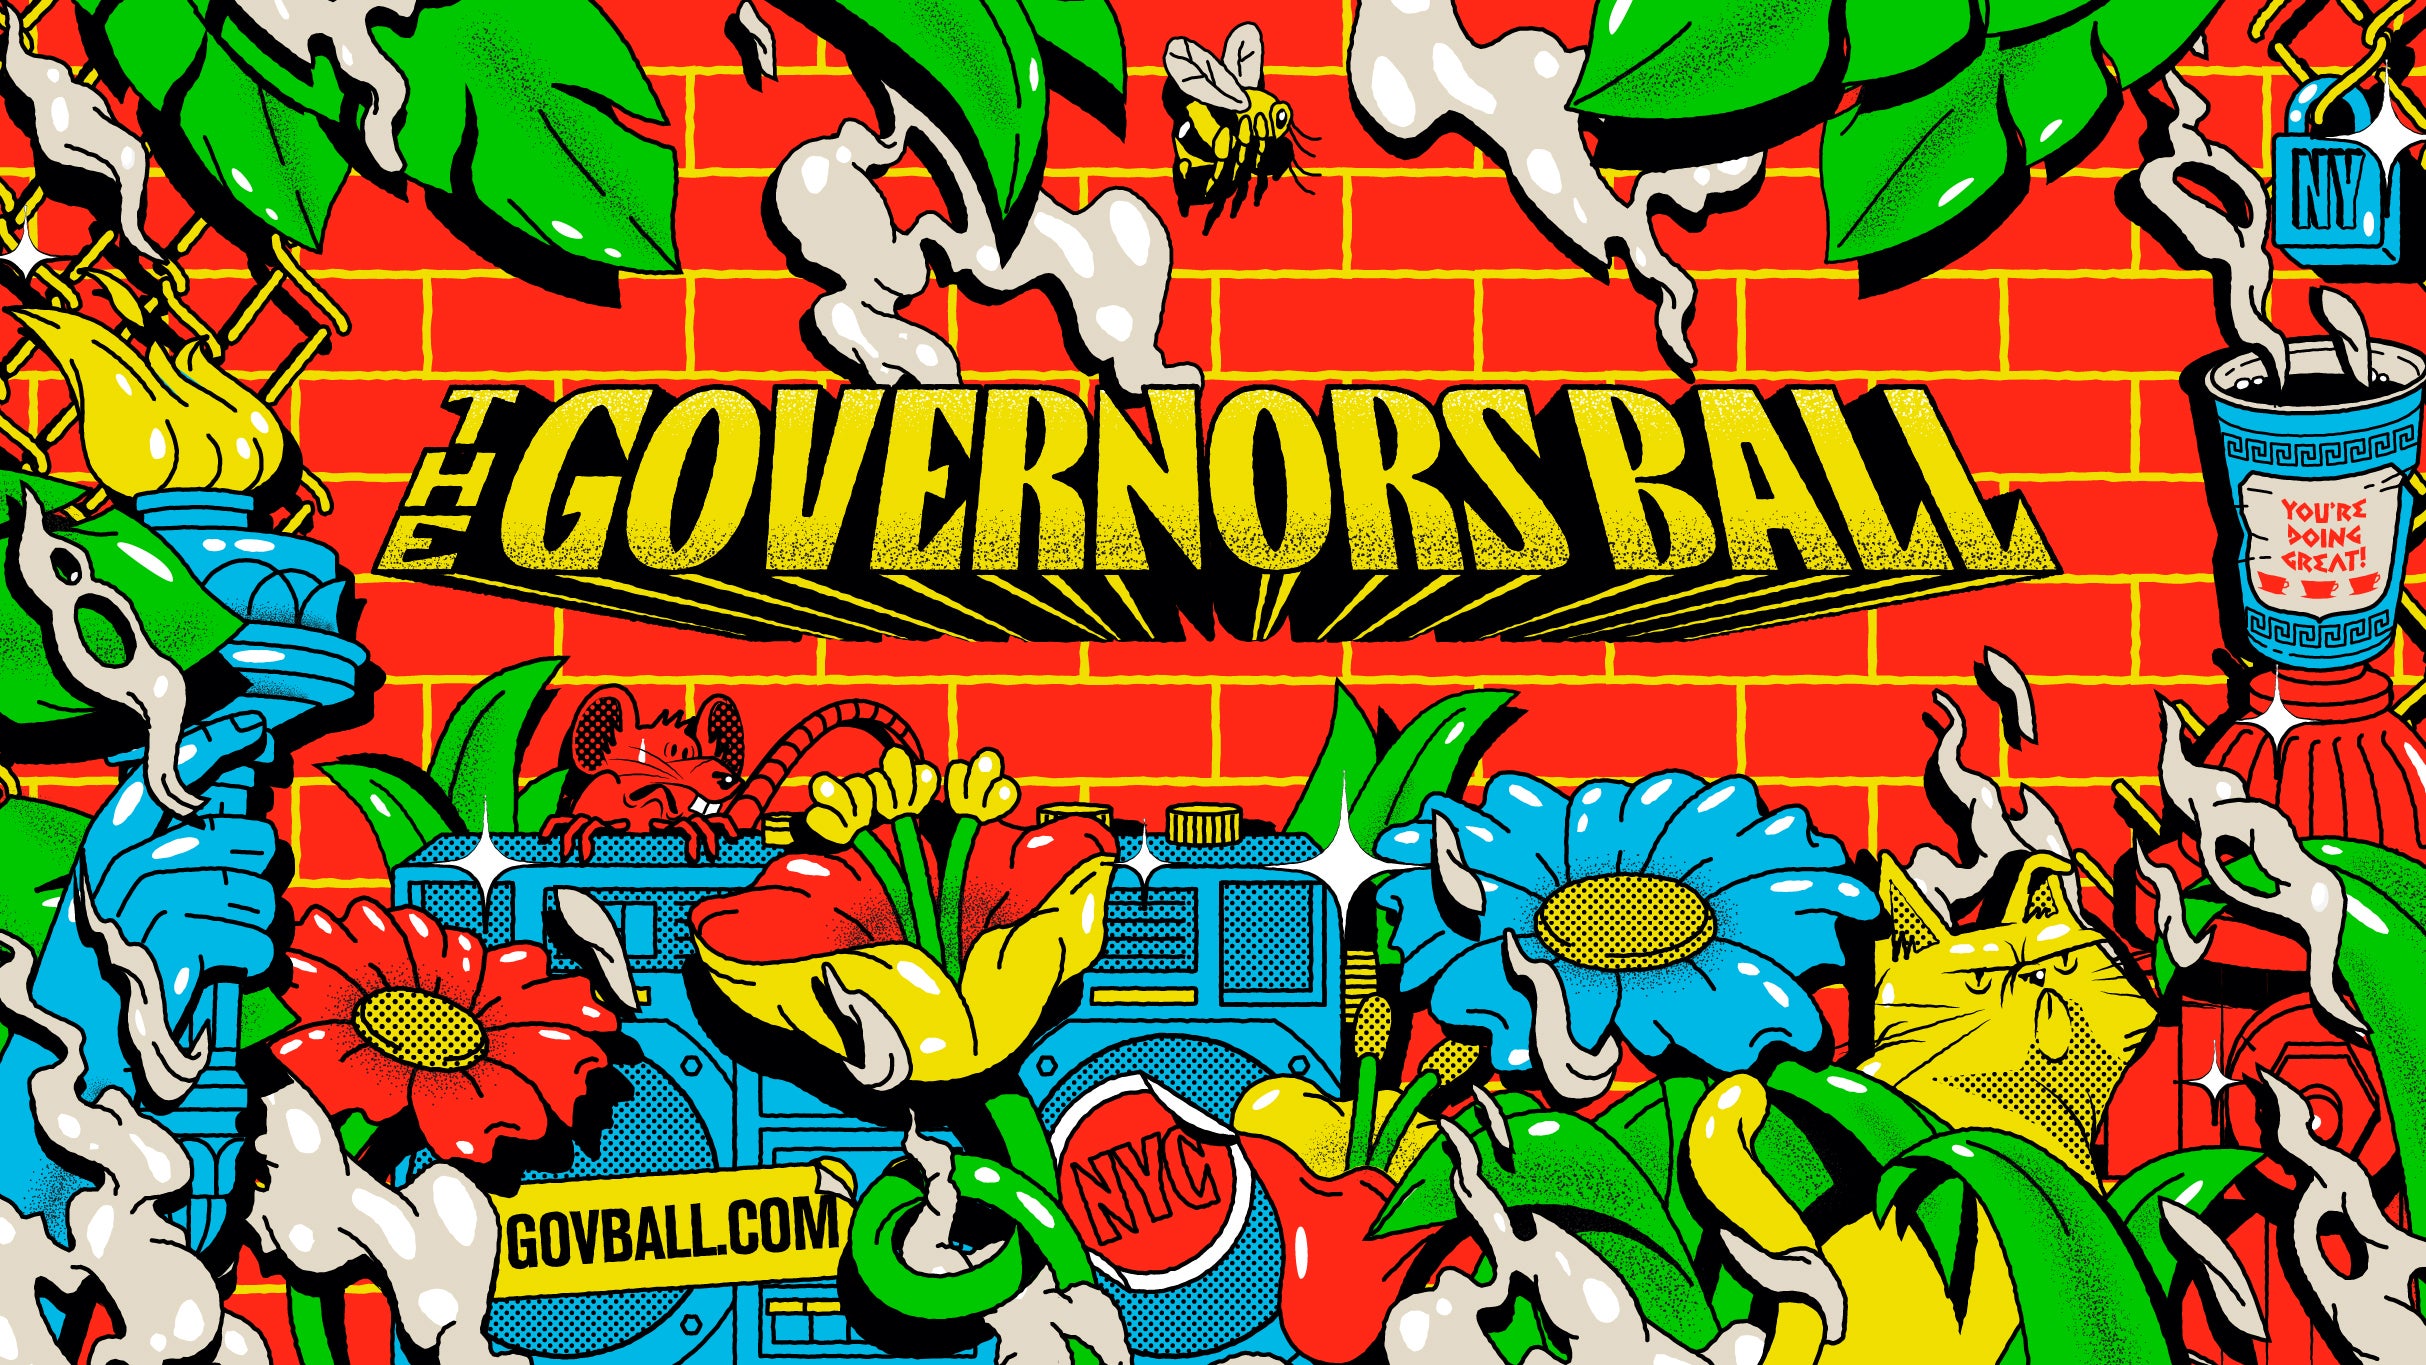 Governors Ball Music Festival at Flushing Meadows Park